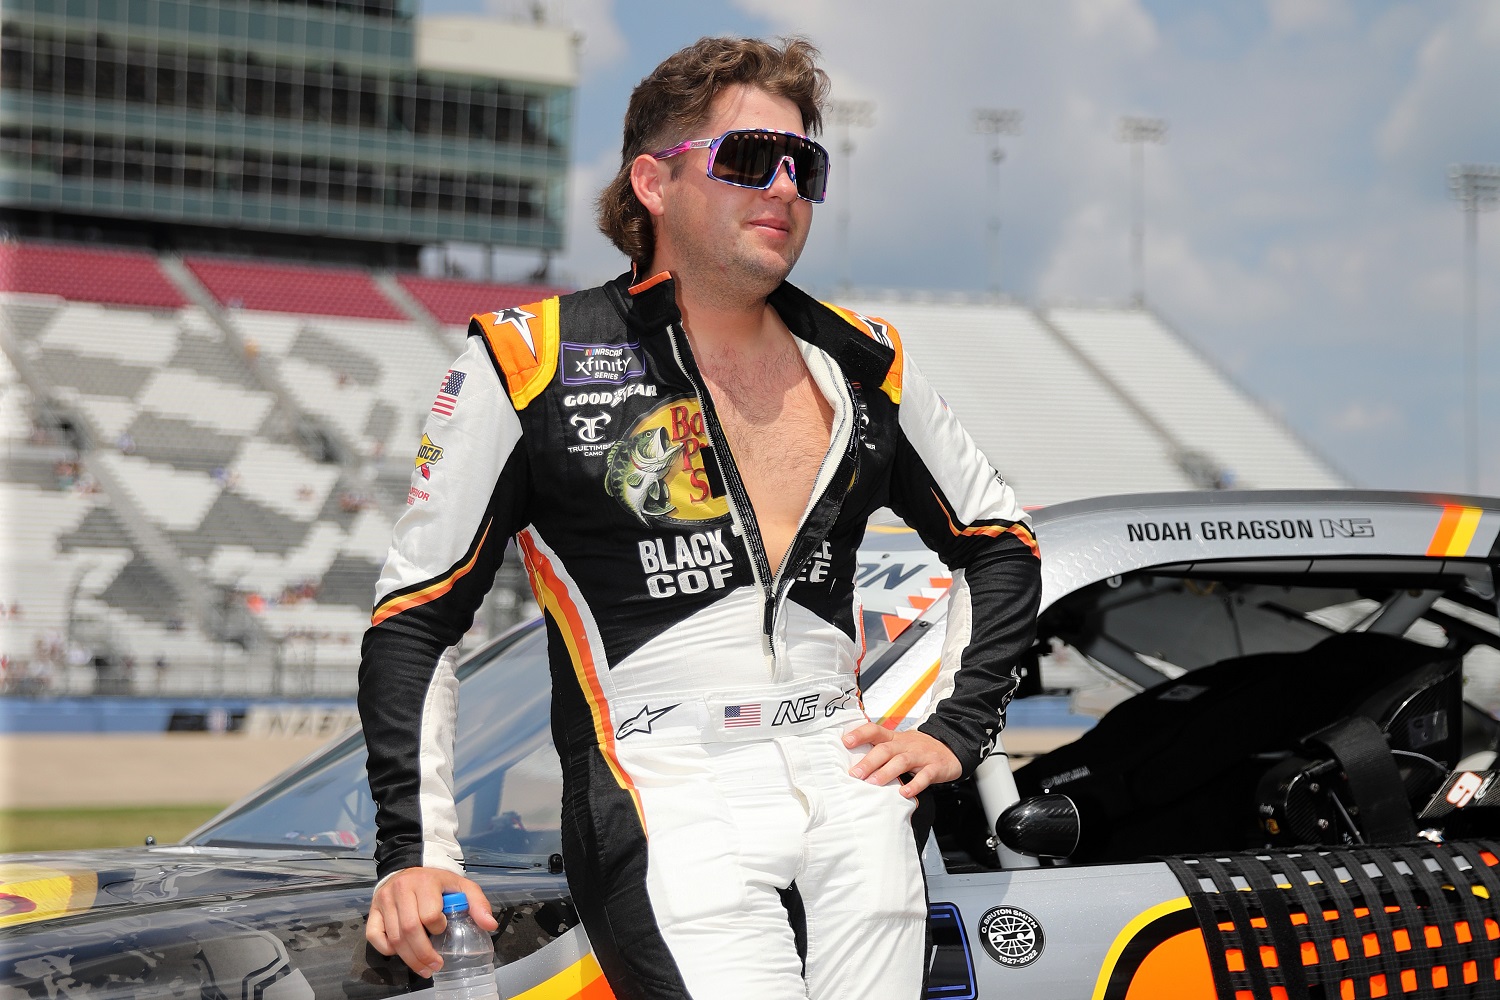 Noah Gragson waits on the grid during qualifying for the NASCAR Xfinity Series Tennessee Lottery 250 at Nashville Superspeedway on June 25, 2022. | Meg Oliphant/Getty Images